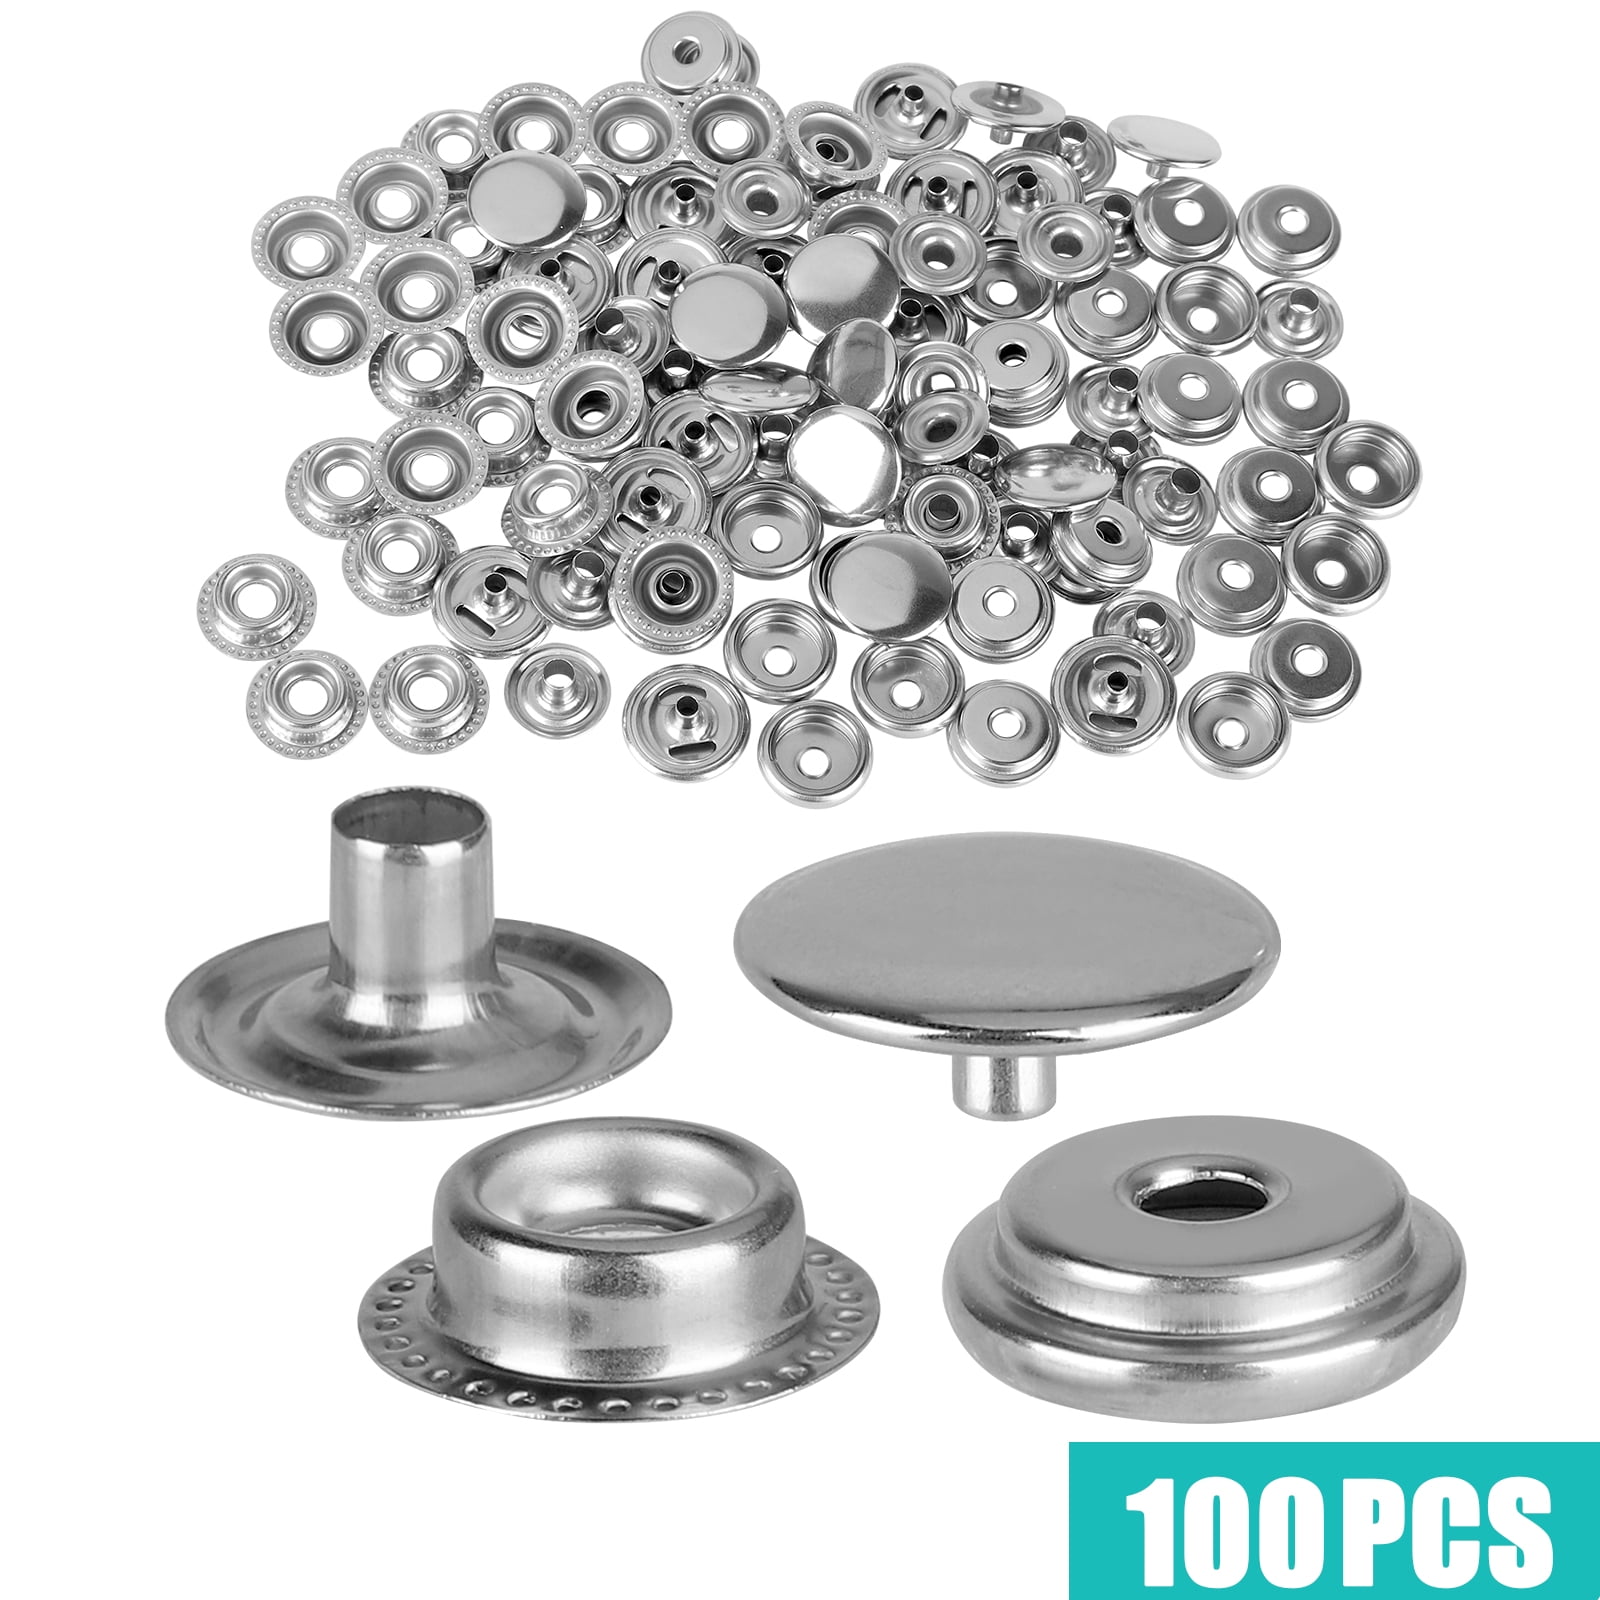 Amiarc 100pcs Snap Button Kit, Metal Snaps for Clothing, Snap Fastener Tool  with Plier, Press Studs